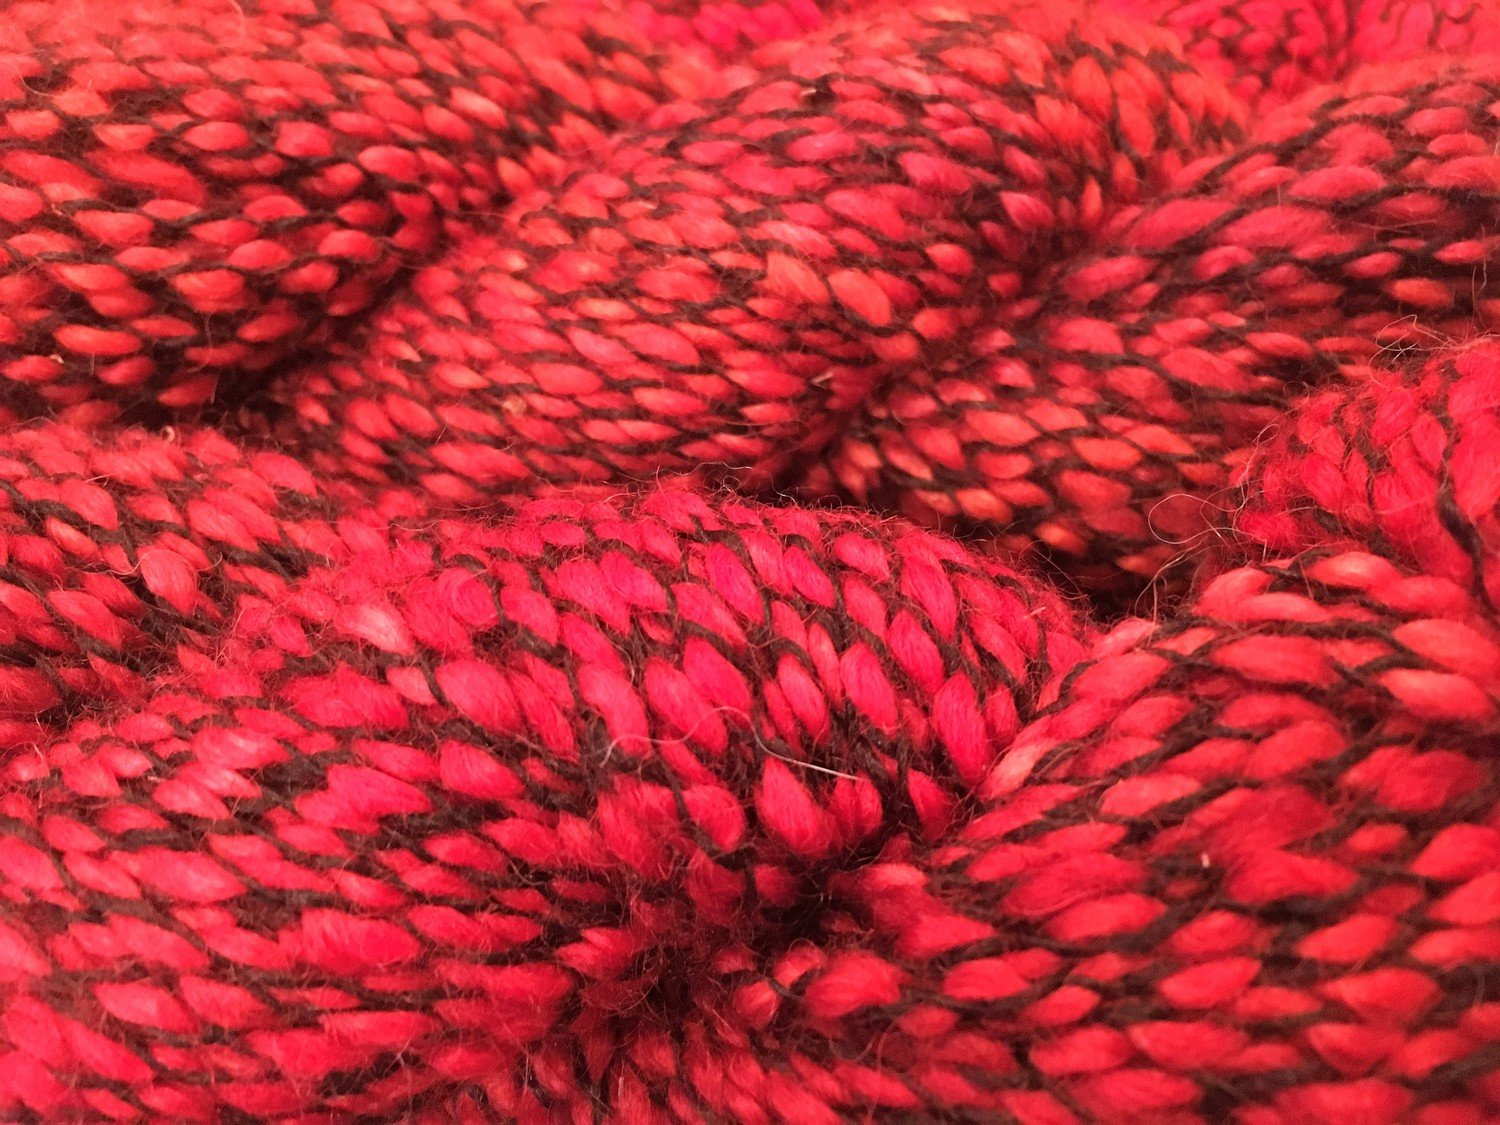 Breezy Hill Cottage-Milled, Corded Yarn - Poppy